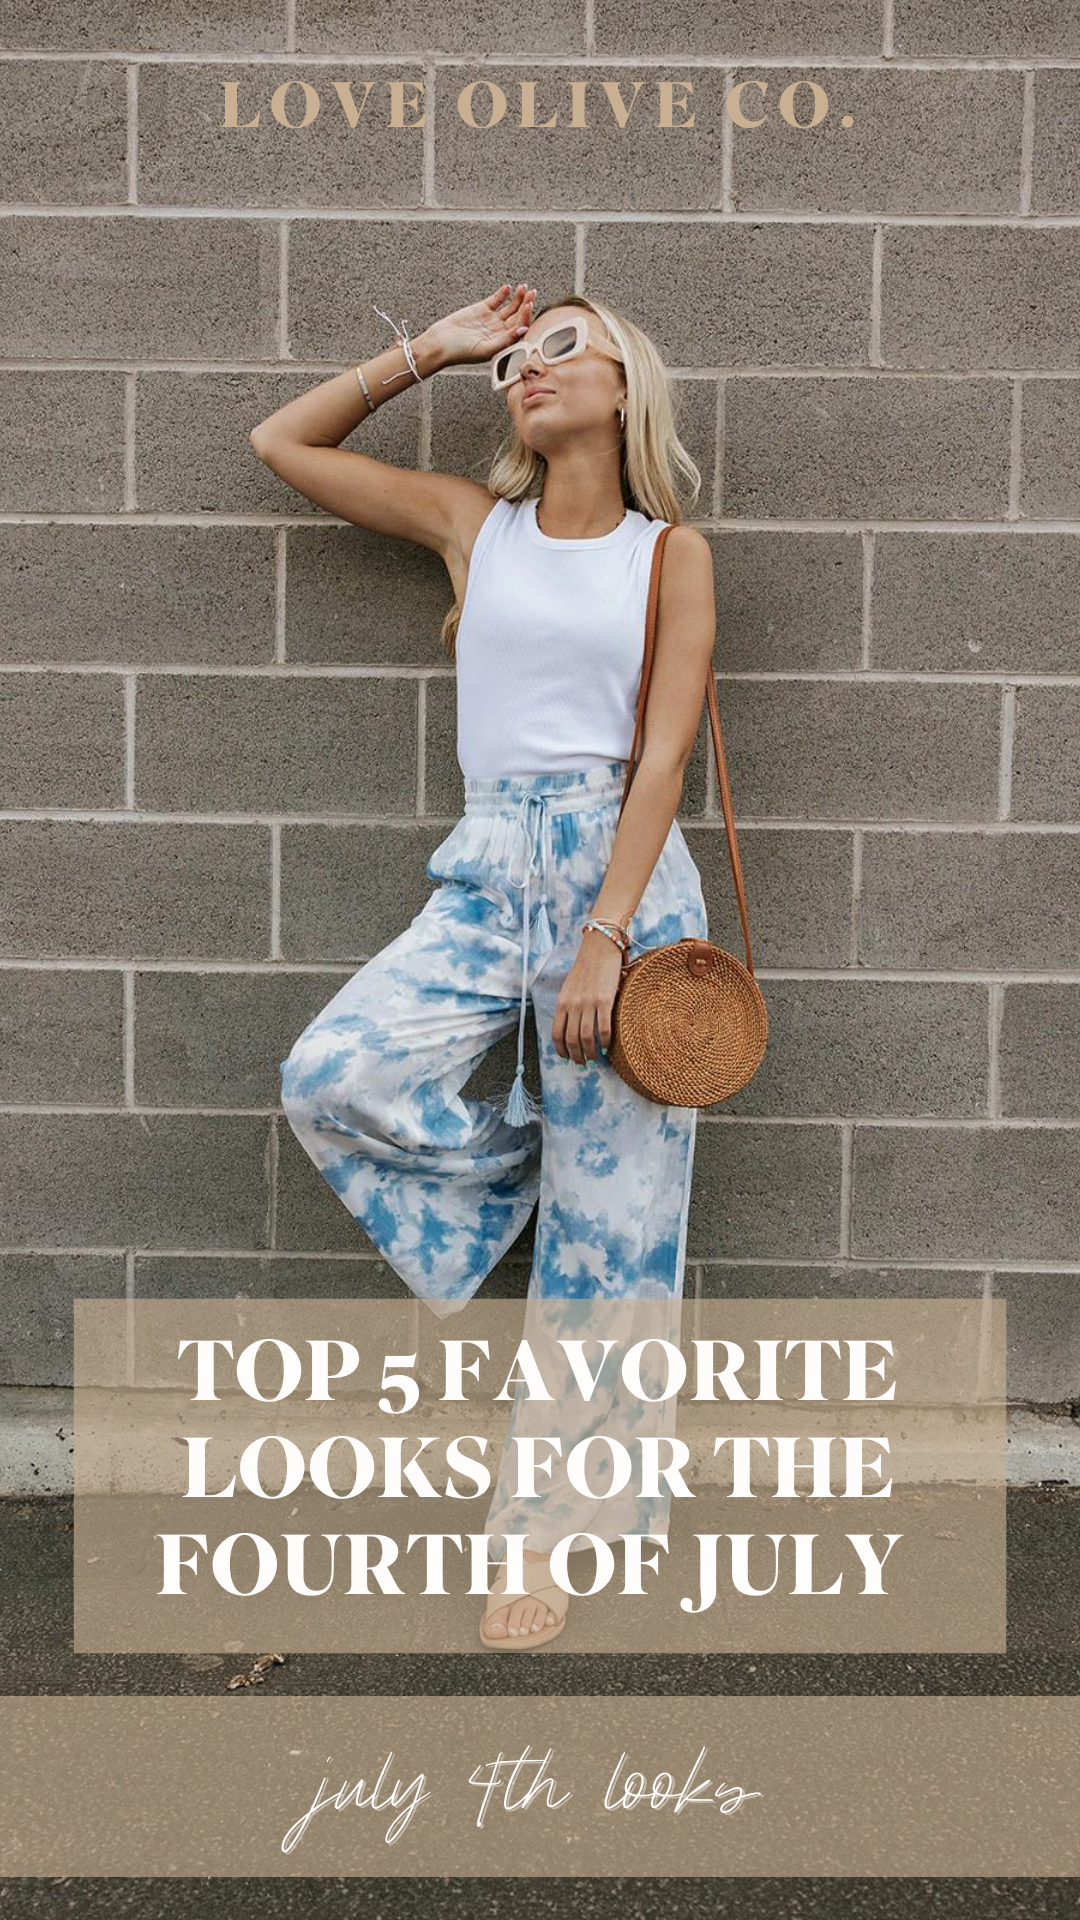 top 5 favorite looks for the fourth of july. www.loveoliveco.com